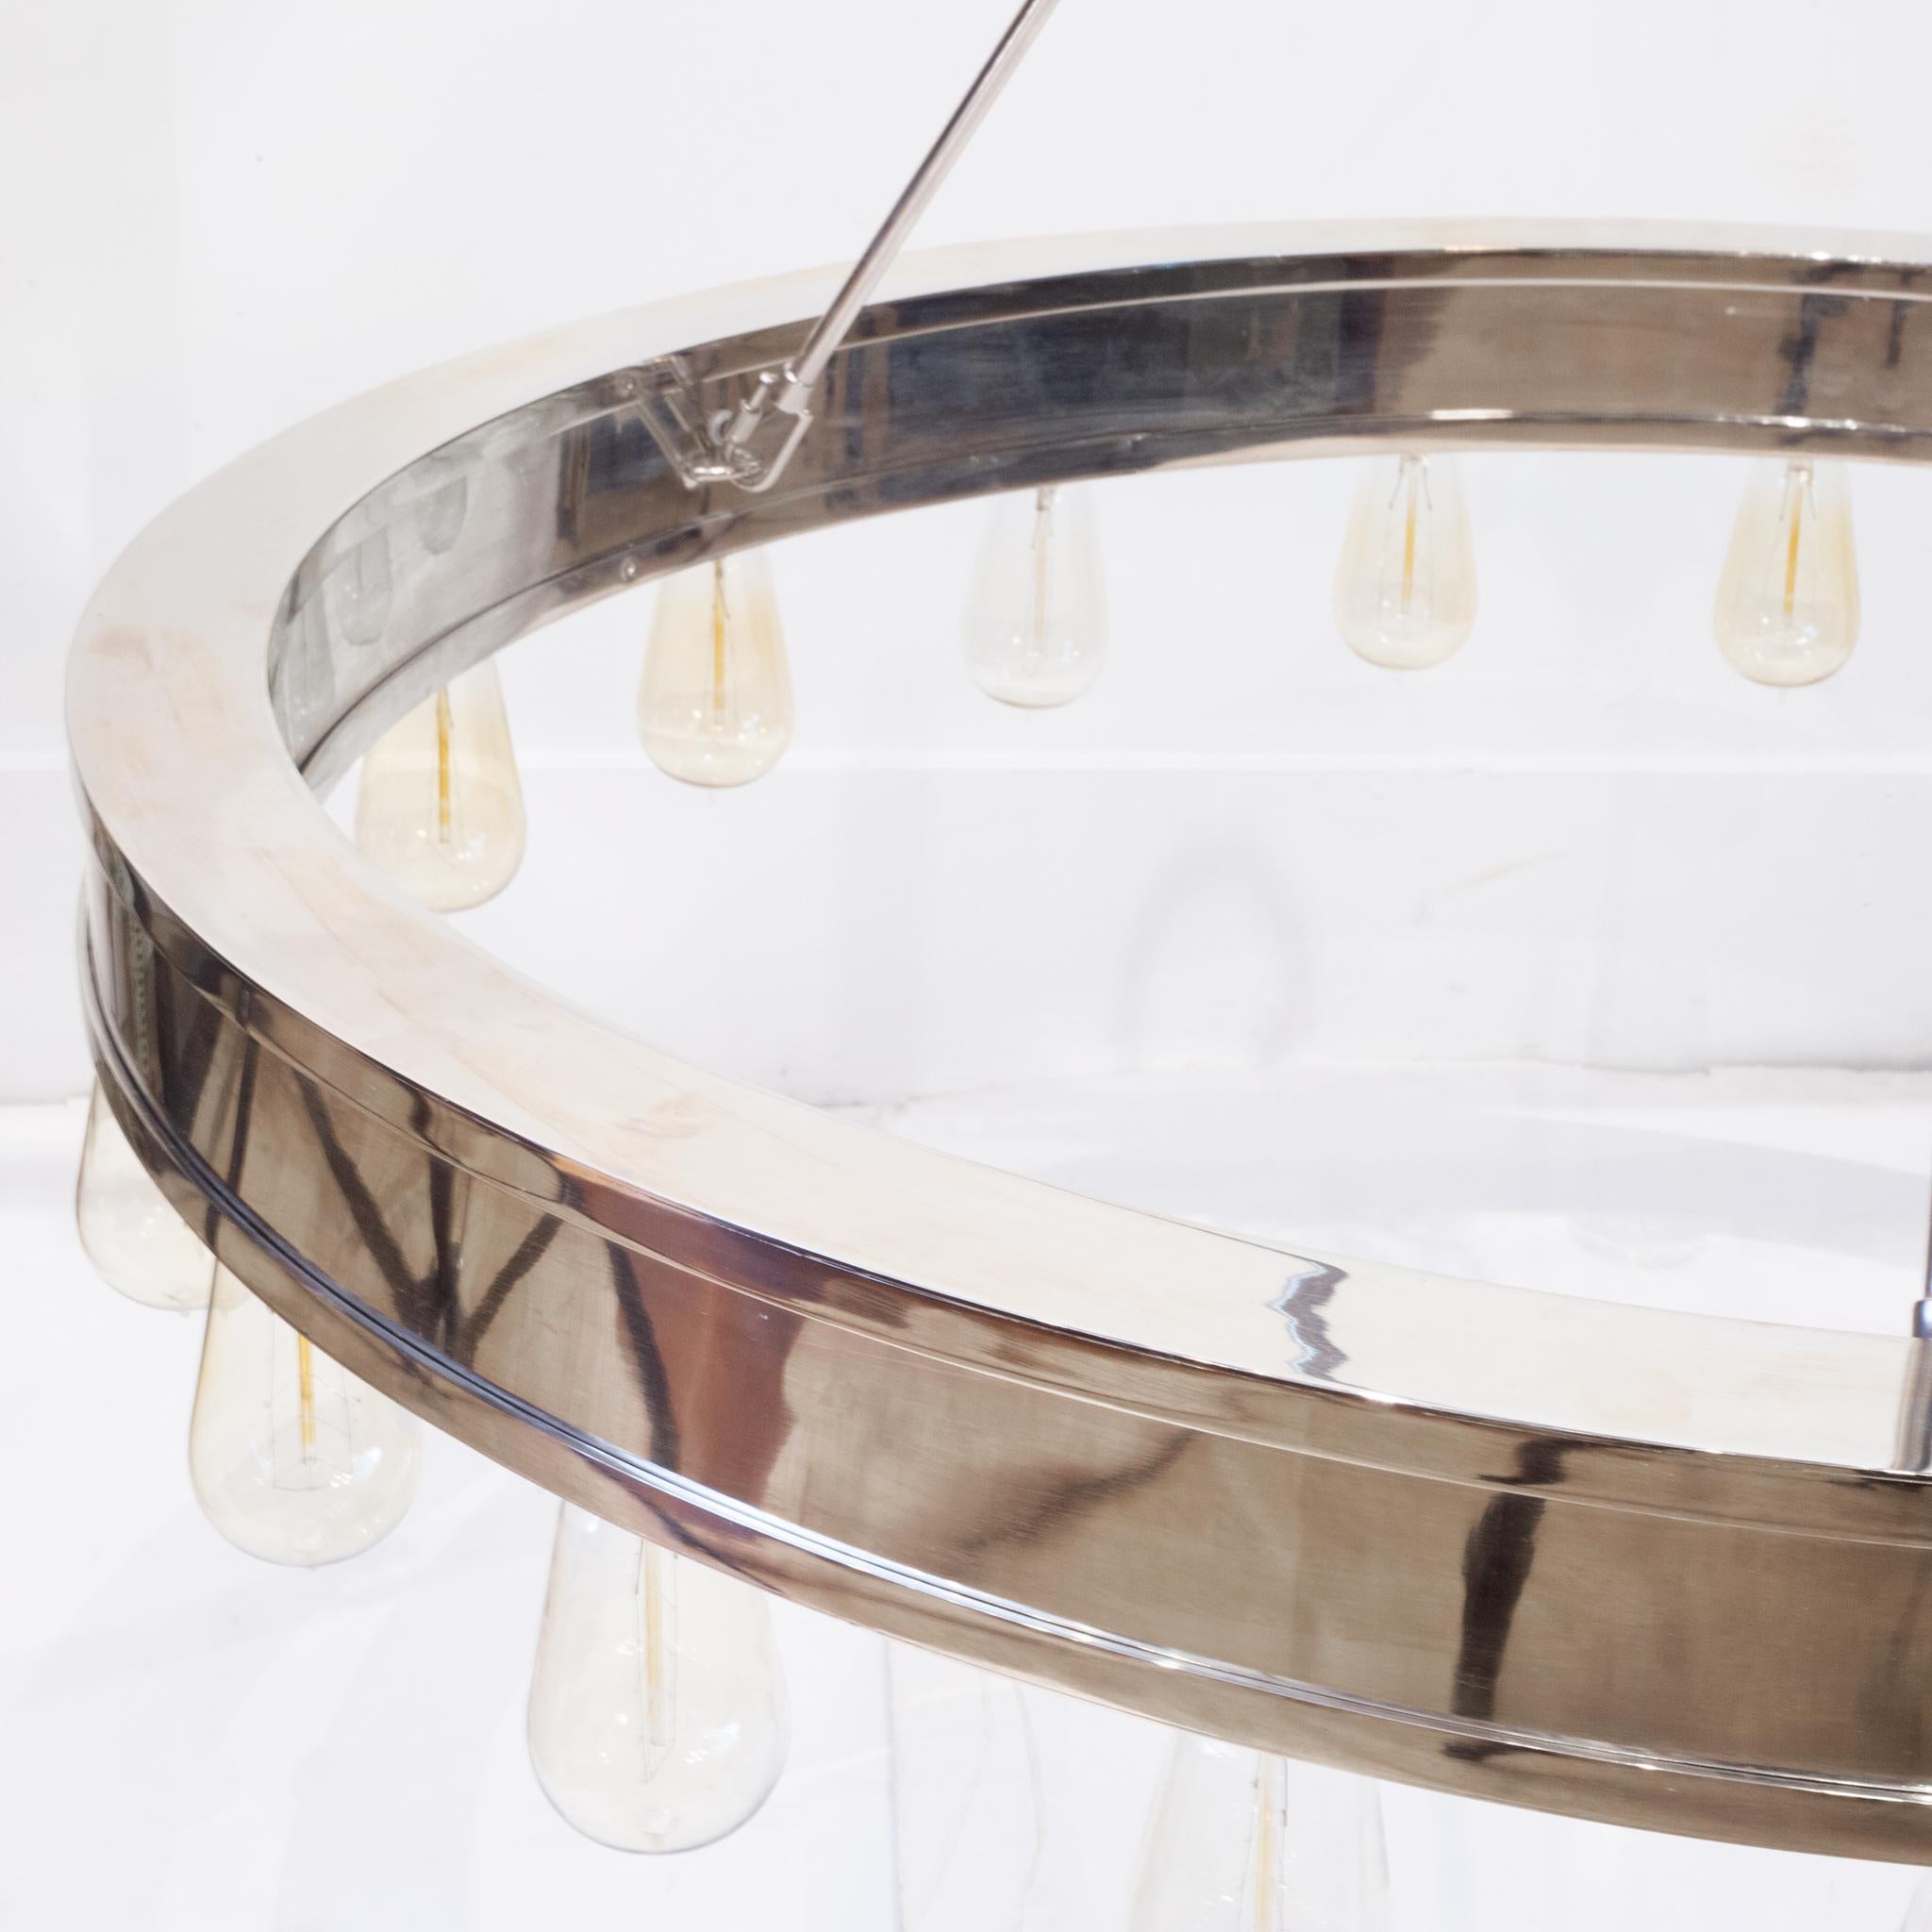 ABOUT

The Roark Modular Ring Chandelier from Visual Comfort is a clean and straightforward example of modern lighting that brings a welcoming silhouette to the home. A thin chainlink descends from the ceiling, leading to a set of thin metal arms